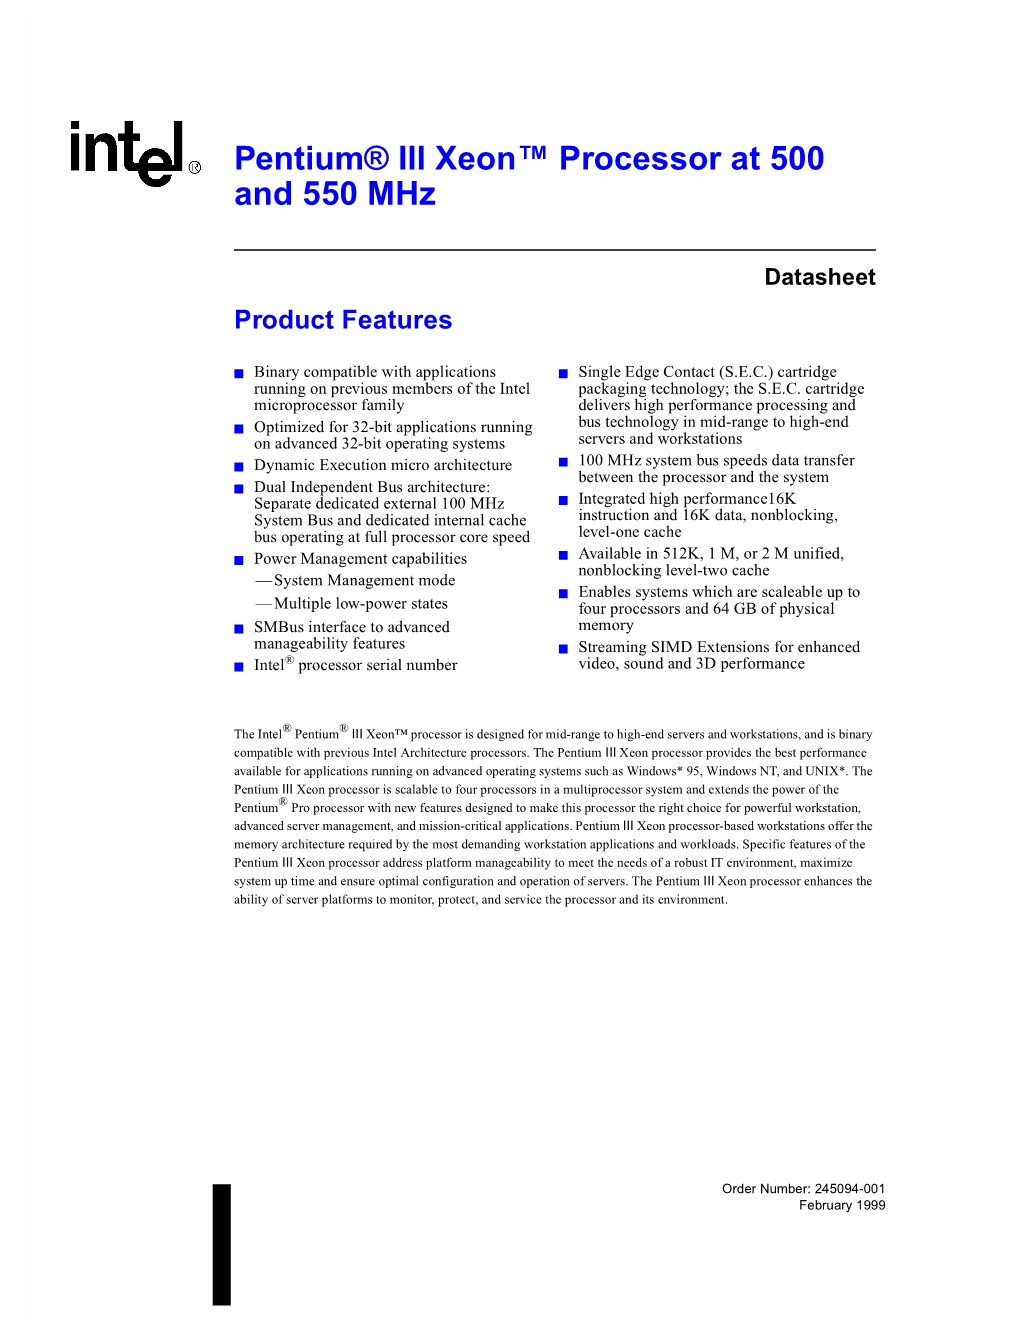 Pentium® III Xeon™ Processor at 500 and 550 Mhz